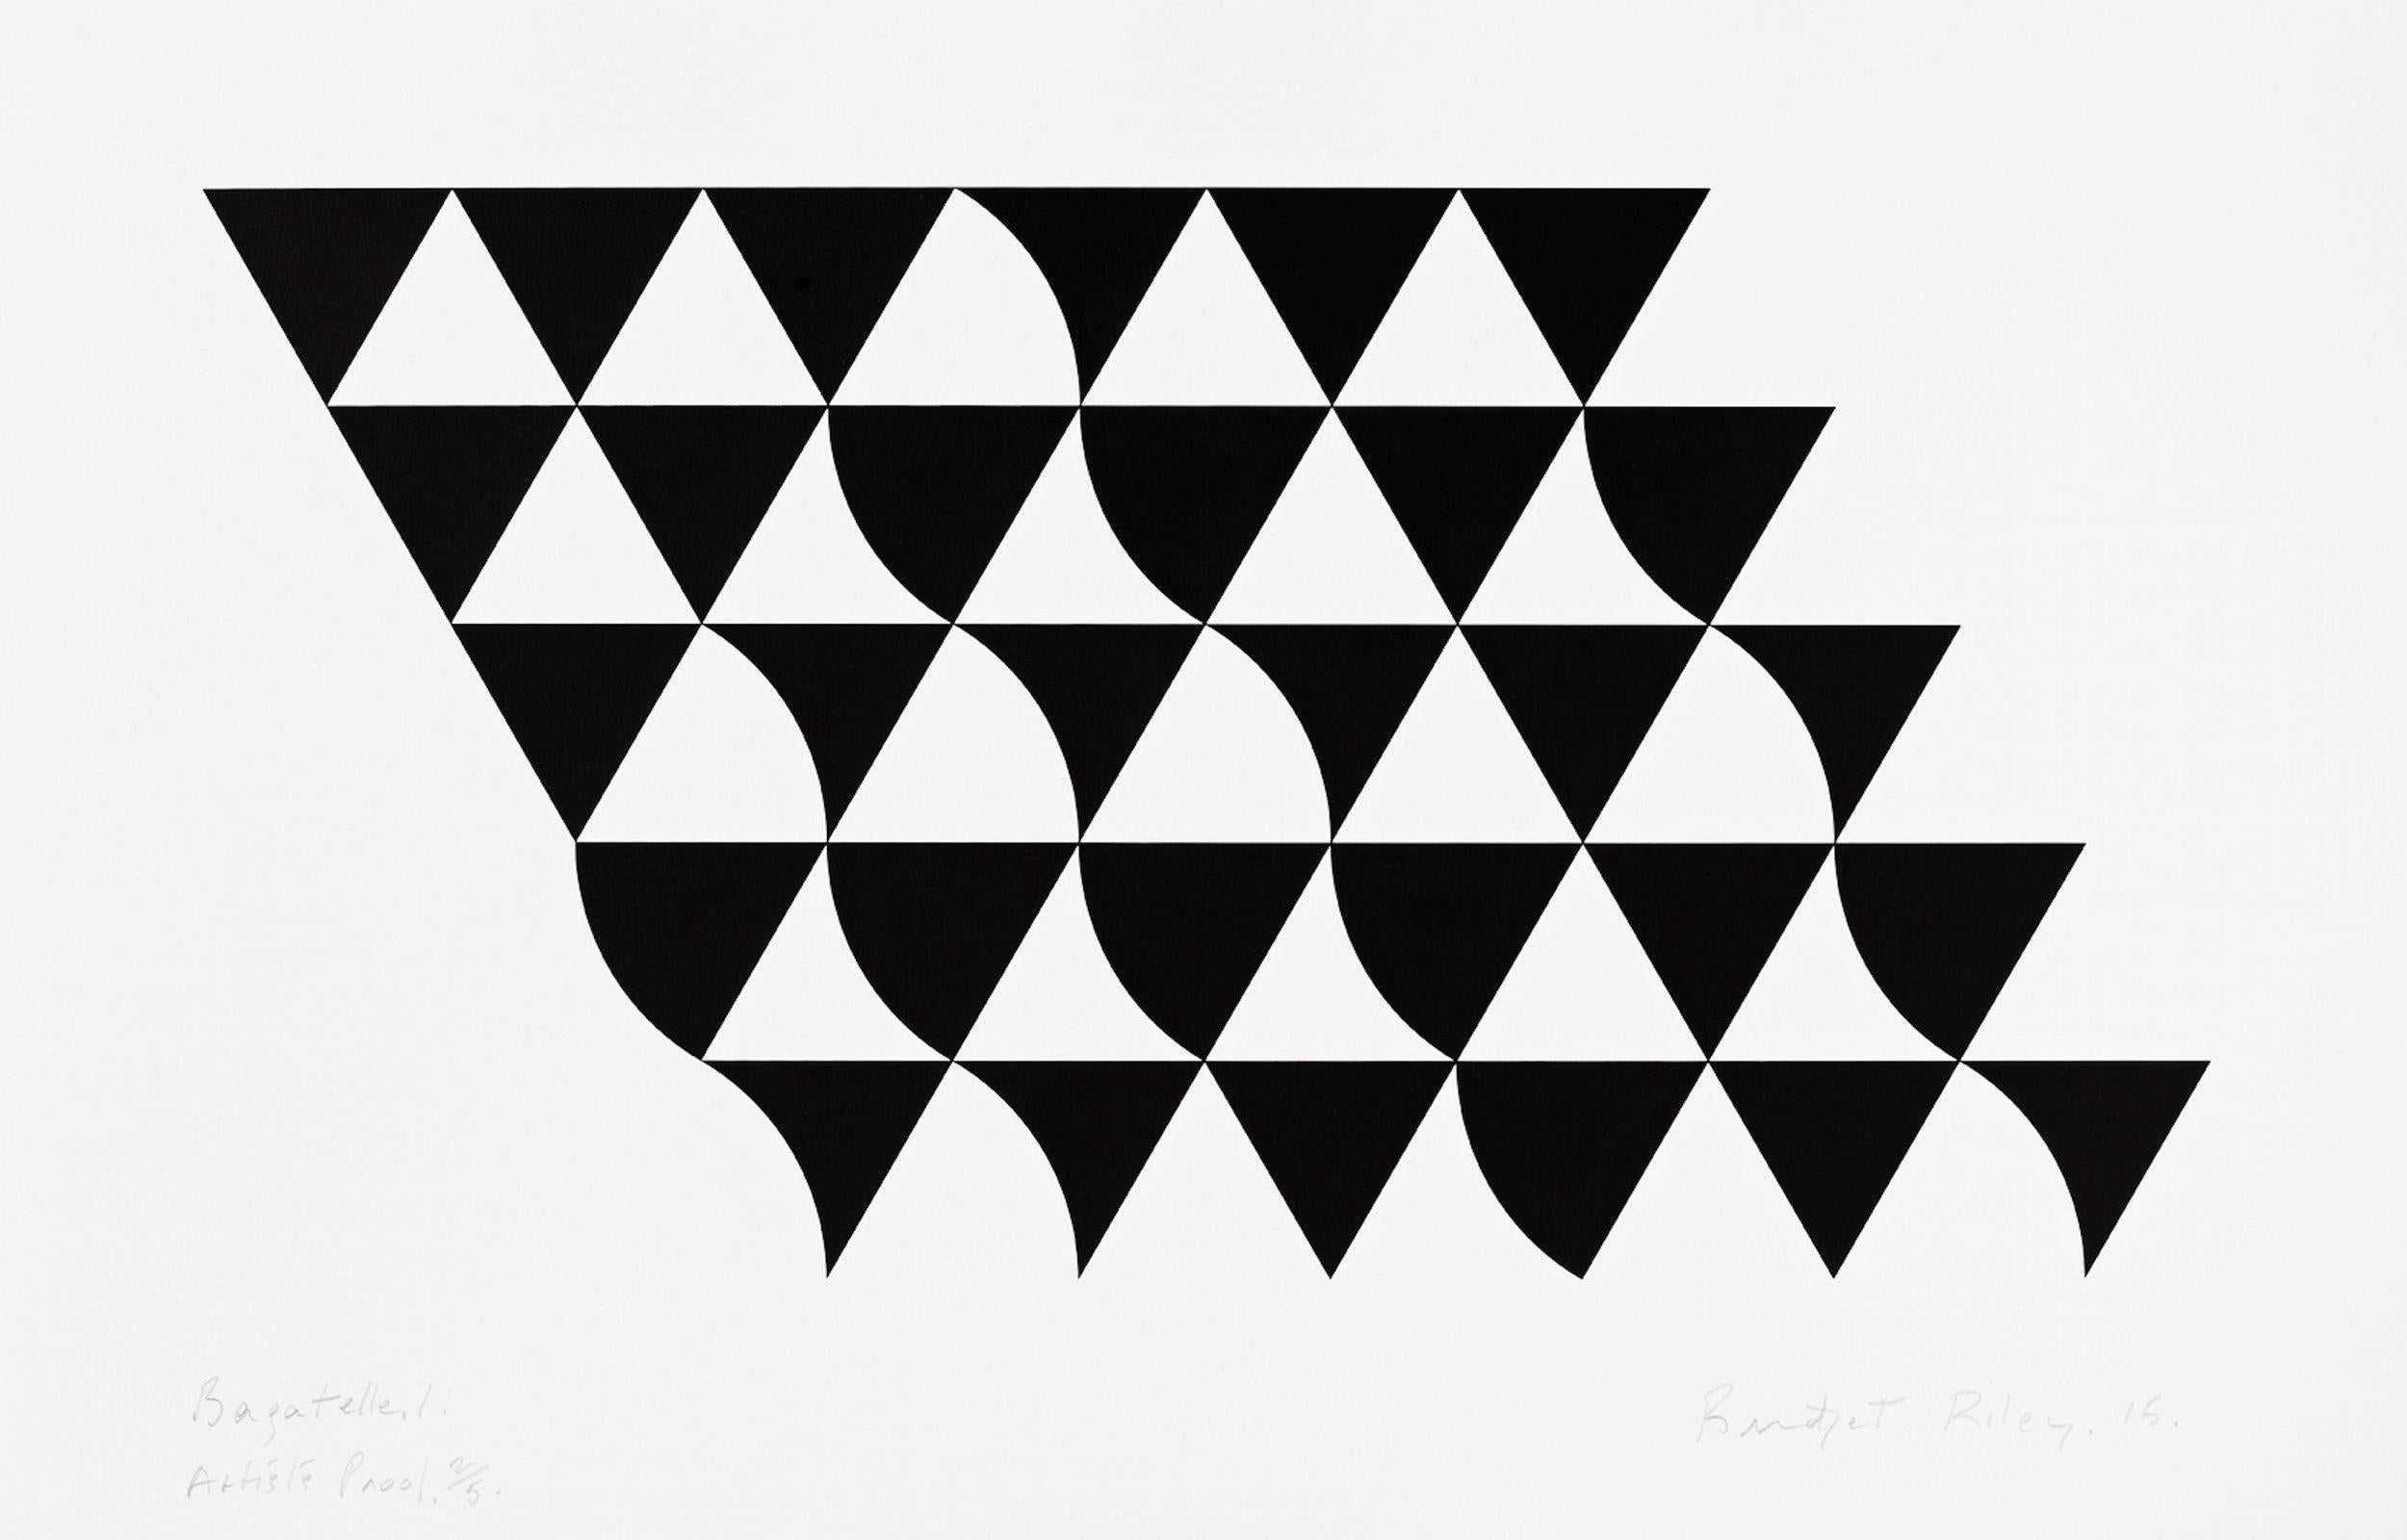 BRIDGET RILEY
Bagatelle 1, 2015

Screenprint, on wove
Signed, titled, dated and numbered from the edition of 75
Published by the artist
Image: 36.0 × 71.0 cm (14.1 × 28.0 in)
Sheet: 52.5 × 82.0 cm (20.6 × 32.3 in)

 
BRIDGET RILEY
Bagatelle 2,